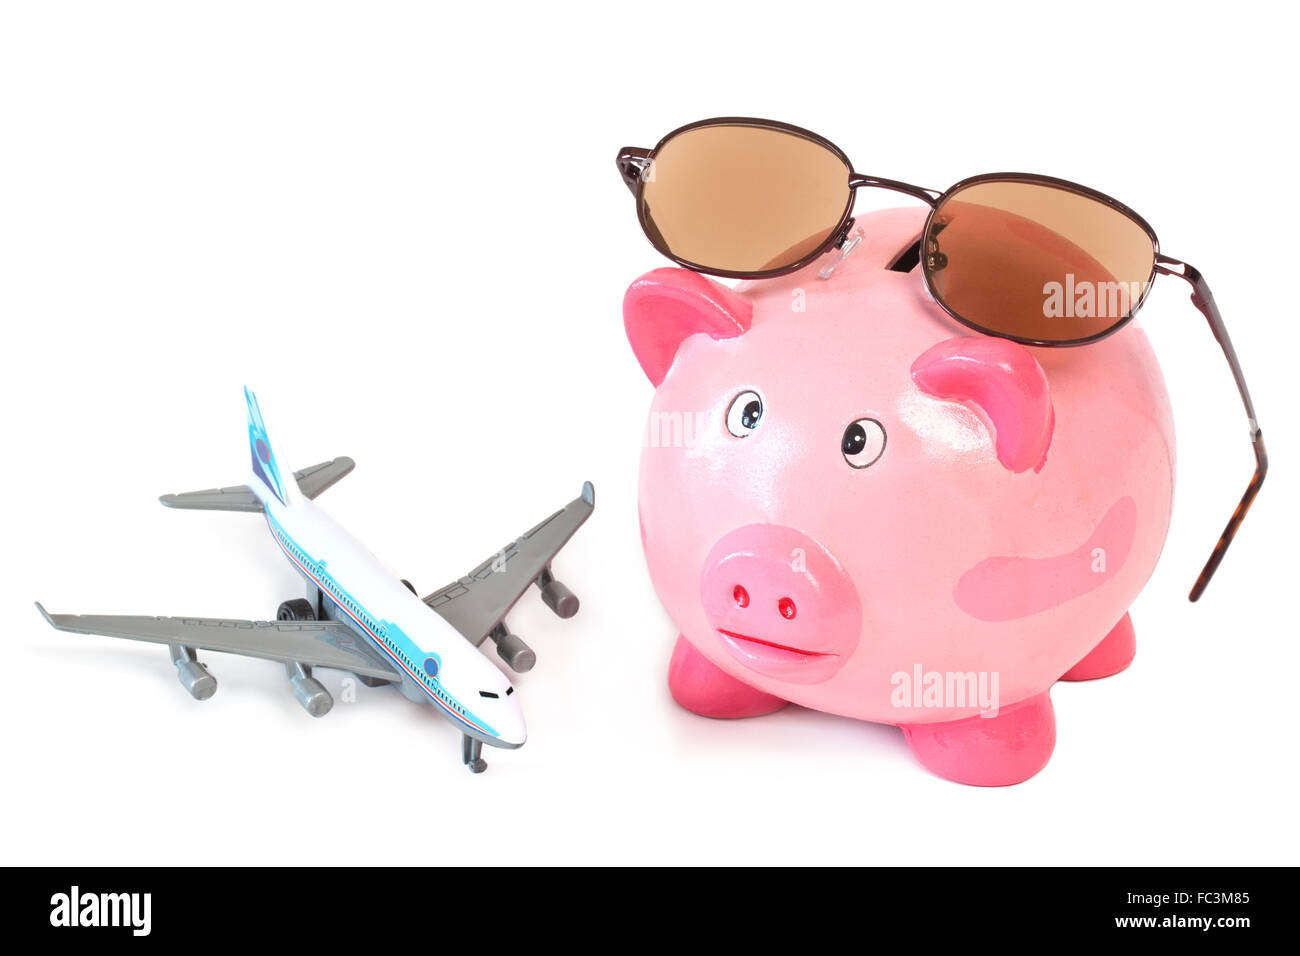 Piggy bank with sunglasses and toy plane Stock Photo